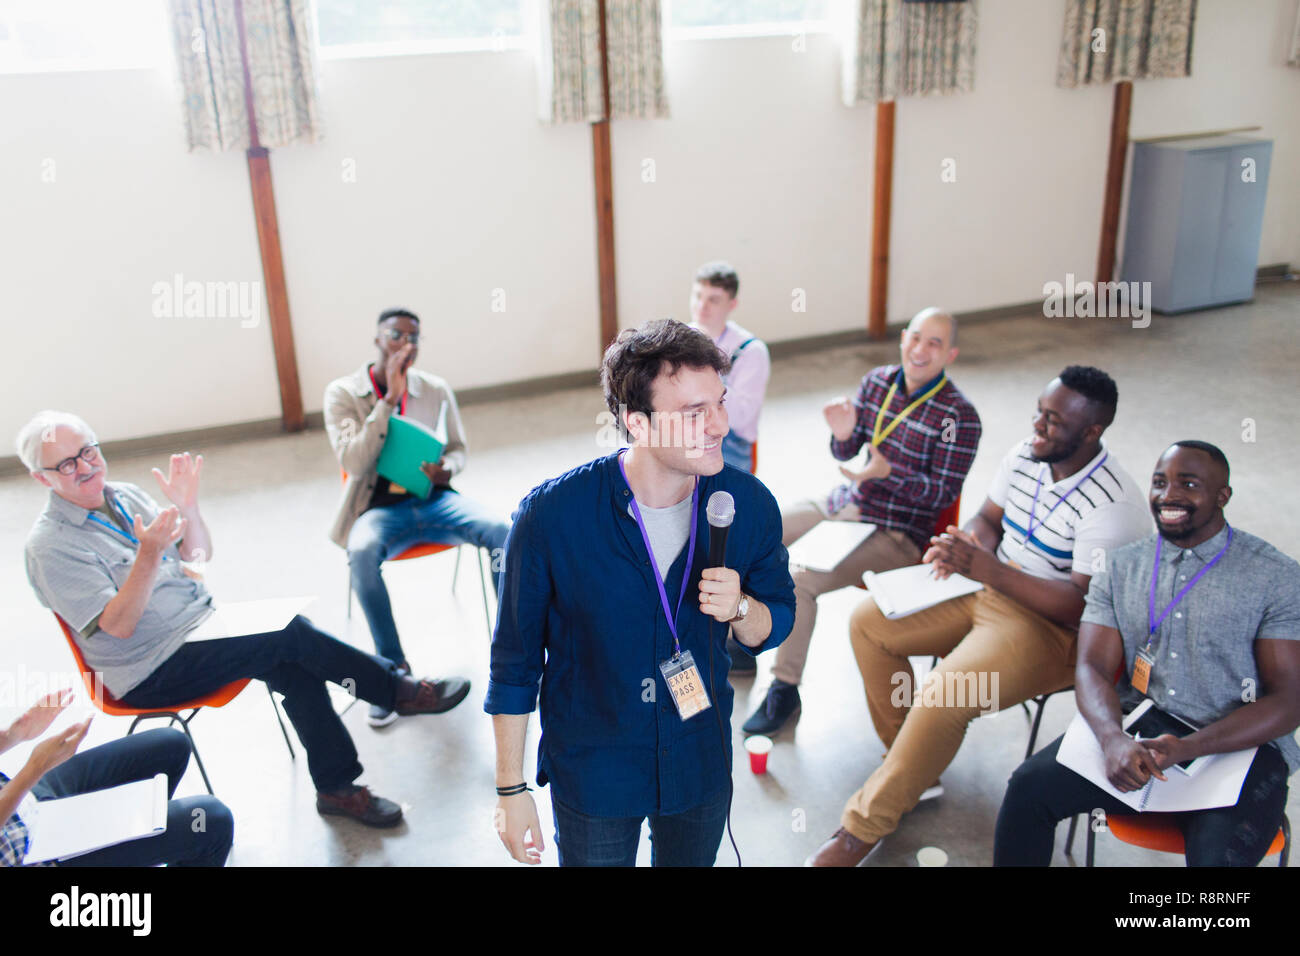 Group clapping for male speaker Stock Photo